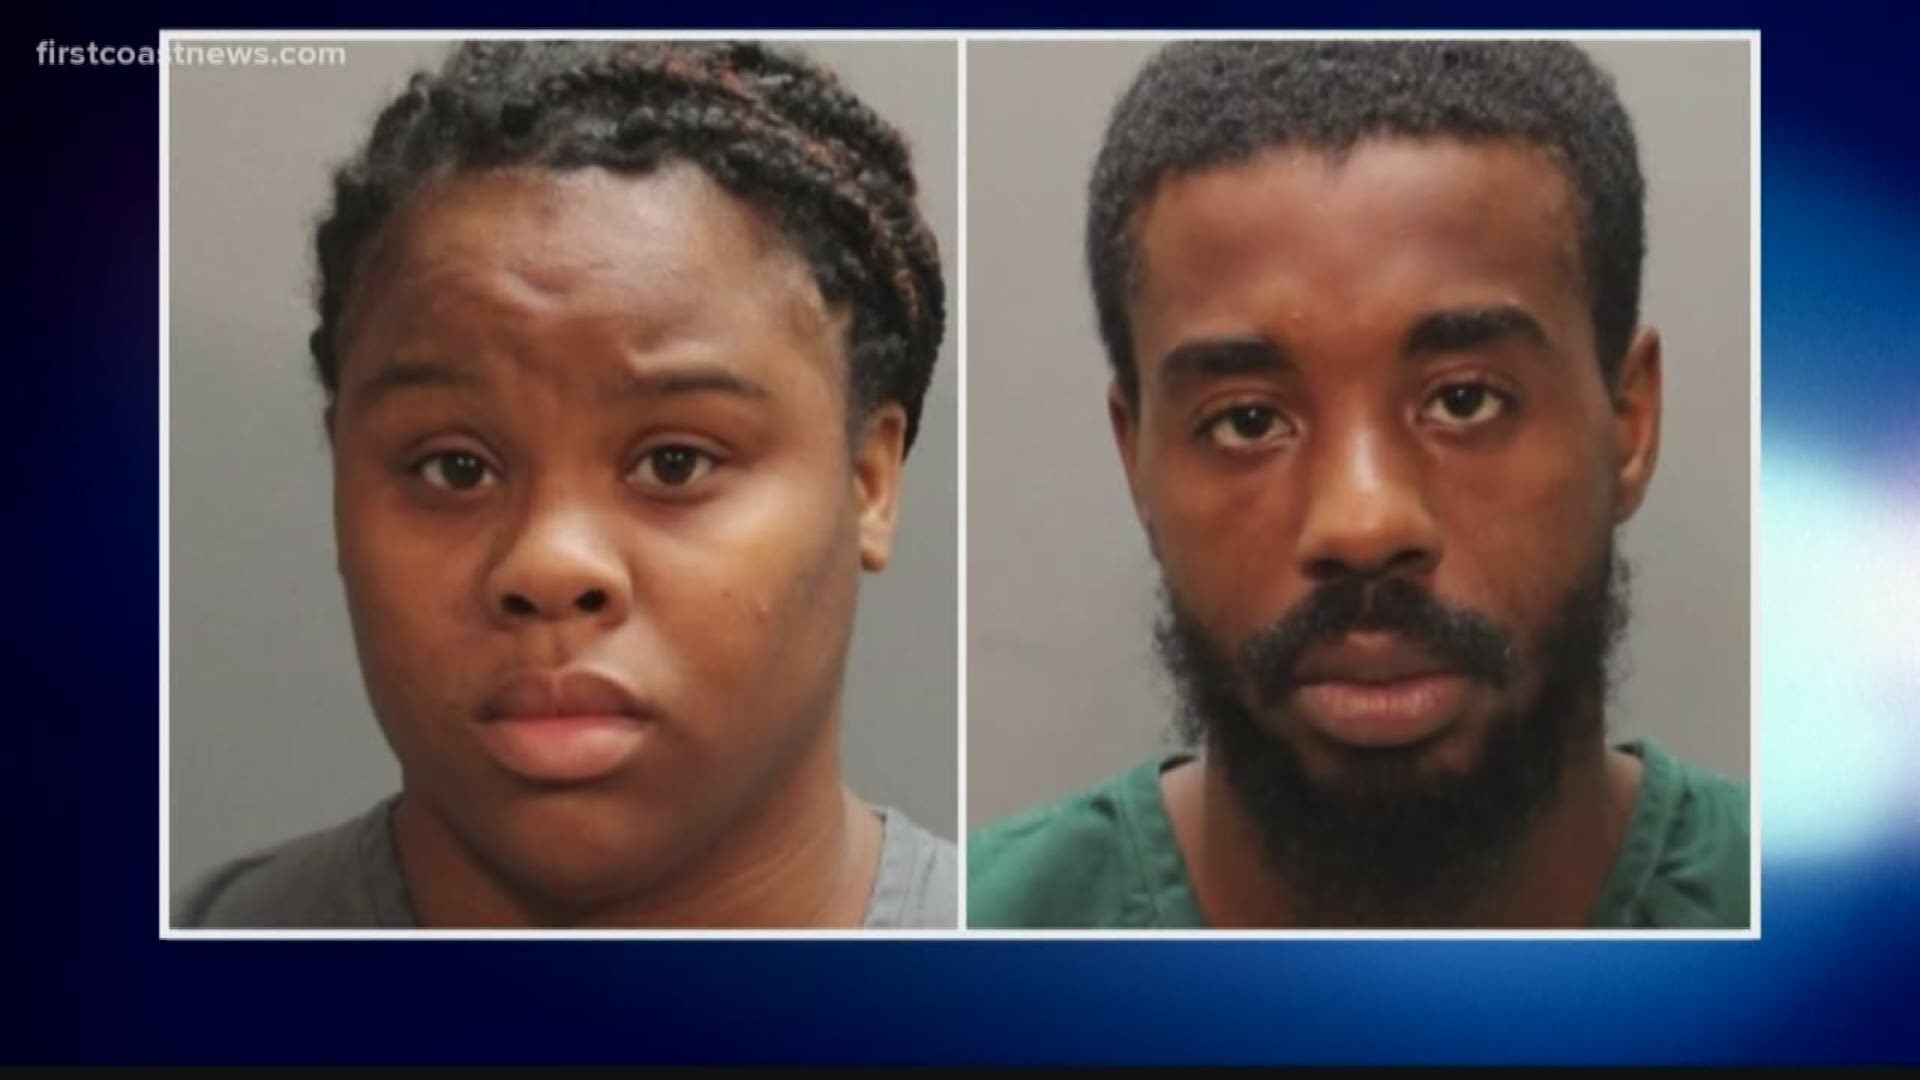 Michelle Lynn Cannimore and her boyfriend, Jonte Dominique Harris were charged with first-degree murder and child abuse over the death Cannimore's daughter Zykerria.